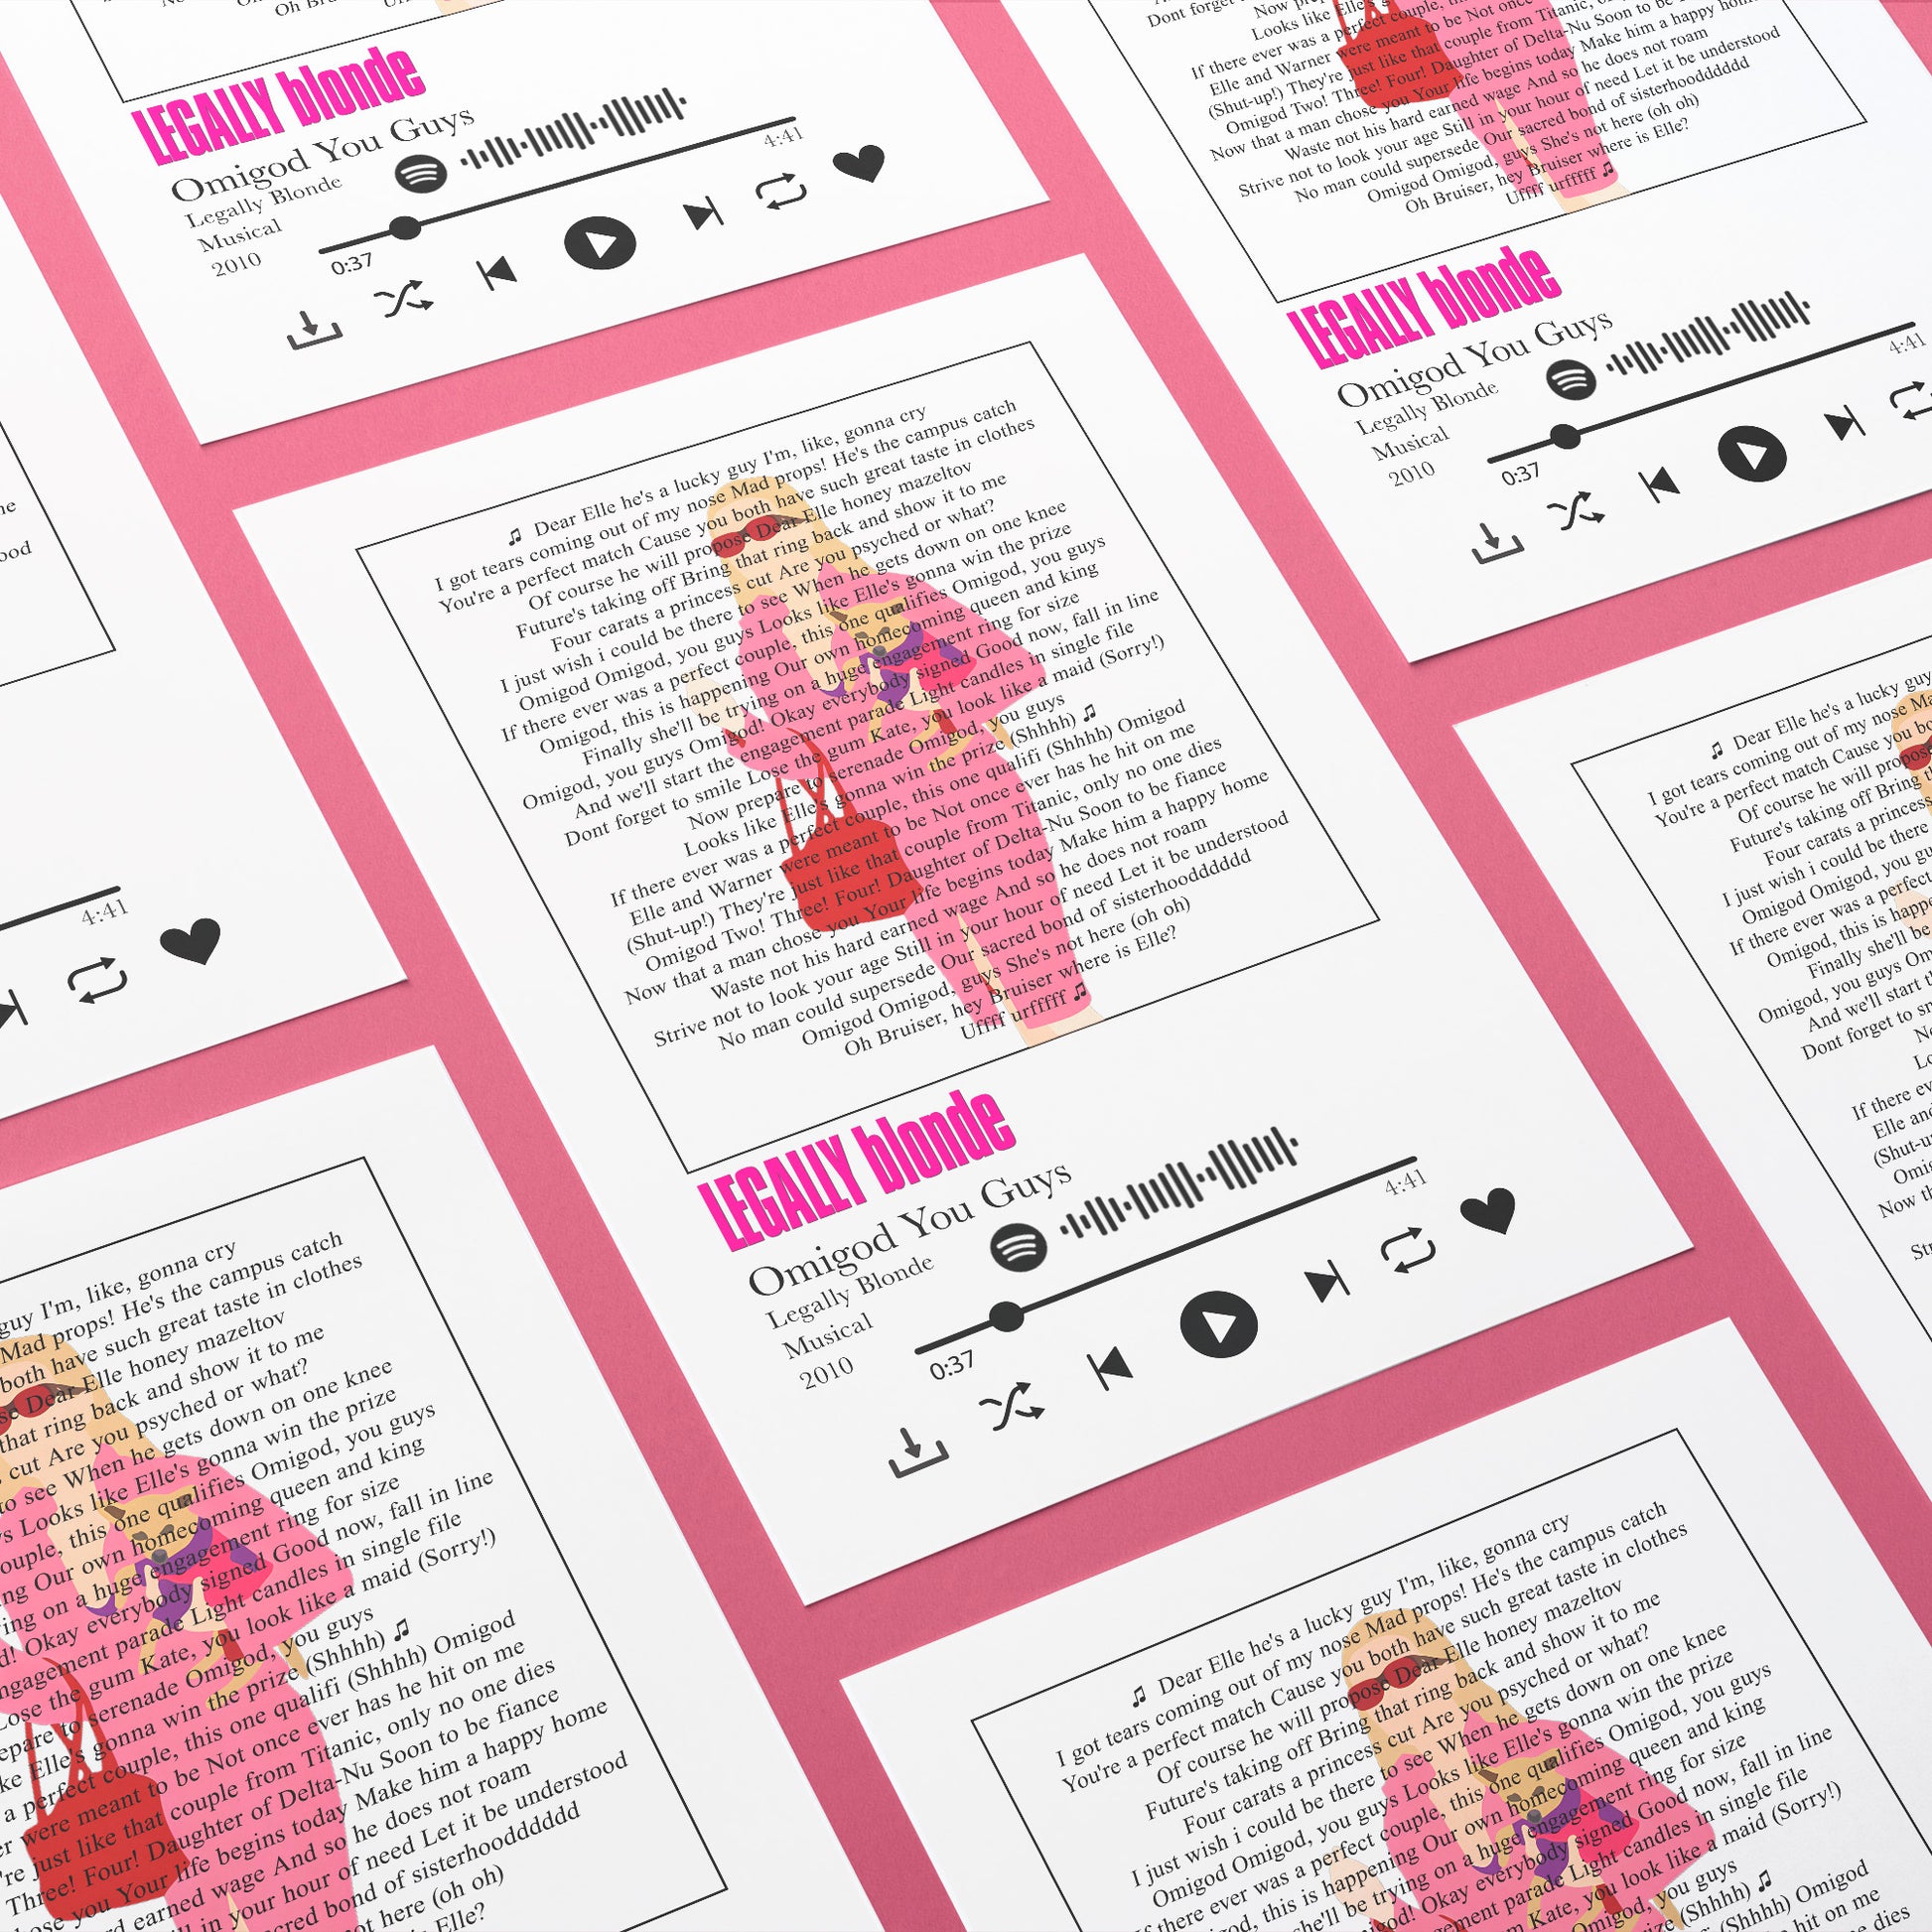 Make your walls sing with our Legally Blonde - Omigod You Guys Prints! Whether you're a fan of Elle Woods or looking for that perfect spotify music lyric print, this range of songlyricprints will have you shoutin' "THIS IS WHAT YOU WANT, THIS IS WHAT YOU GET!" (In the best way possible — no arrest warrants here). With countless tunes to choose from, you can curate your walls with the most personalised song lyrics print you can imagine!